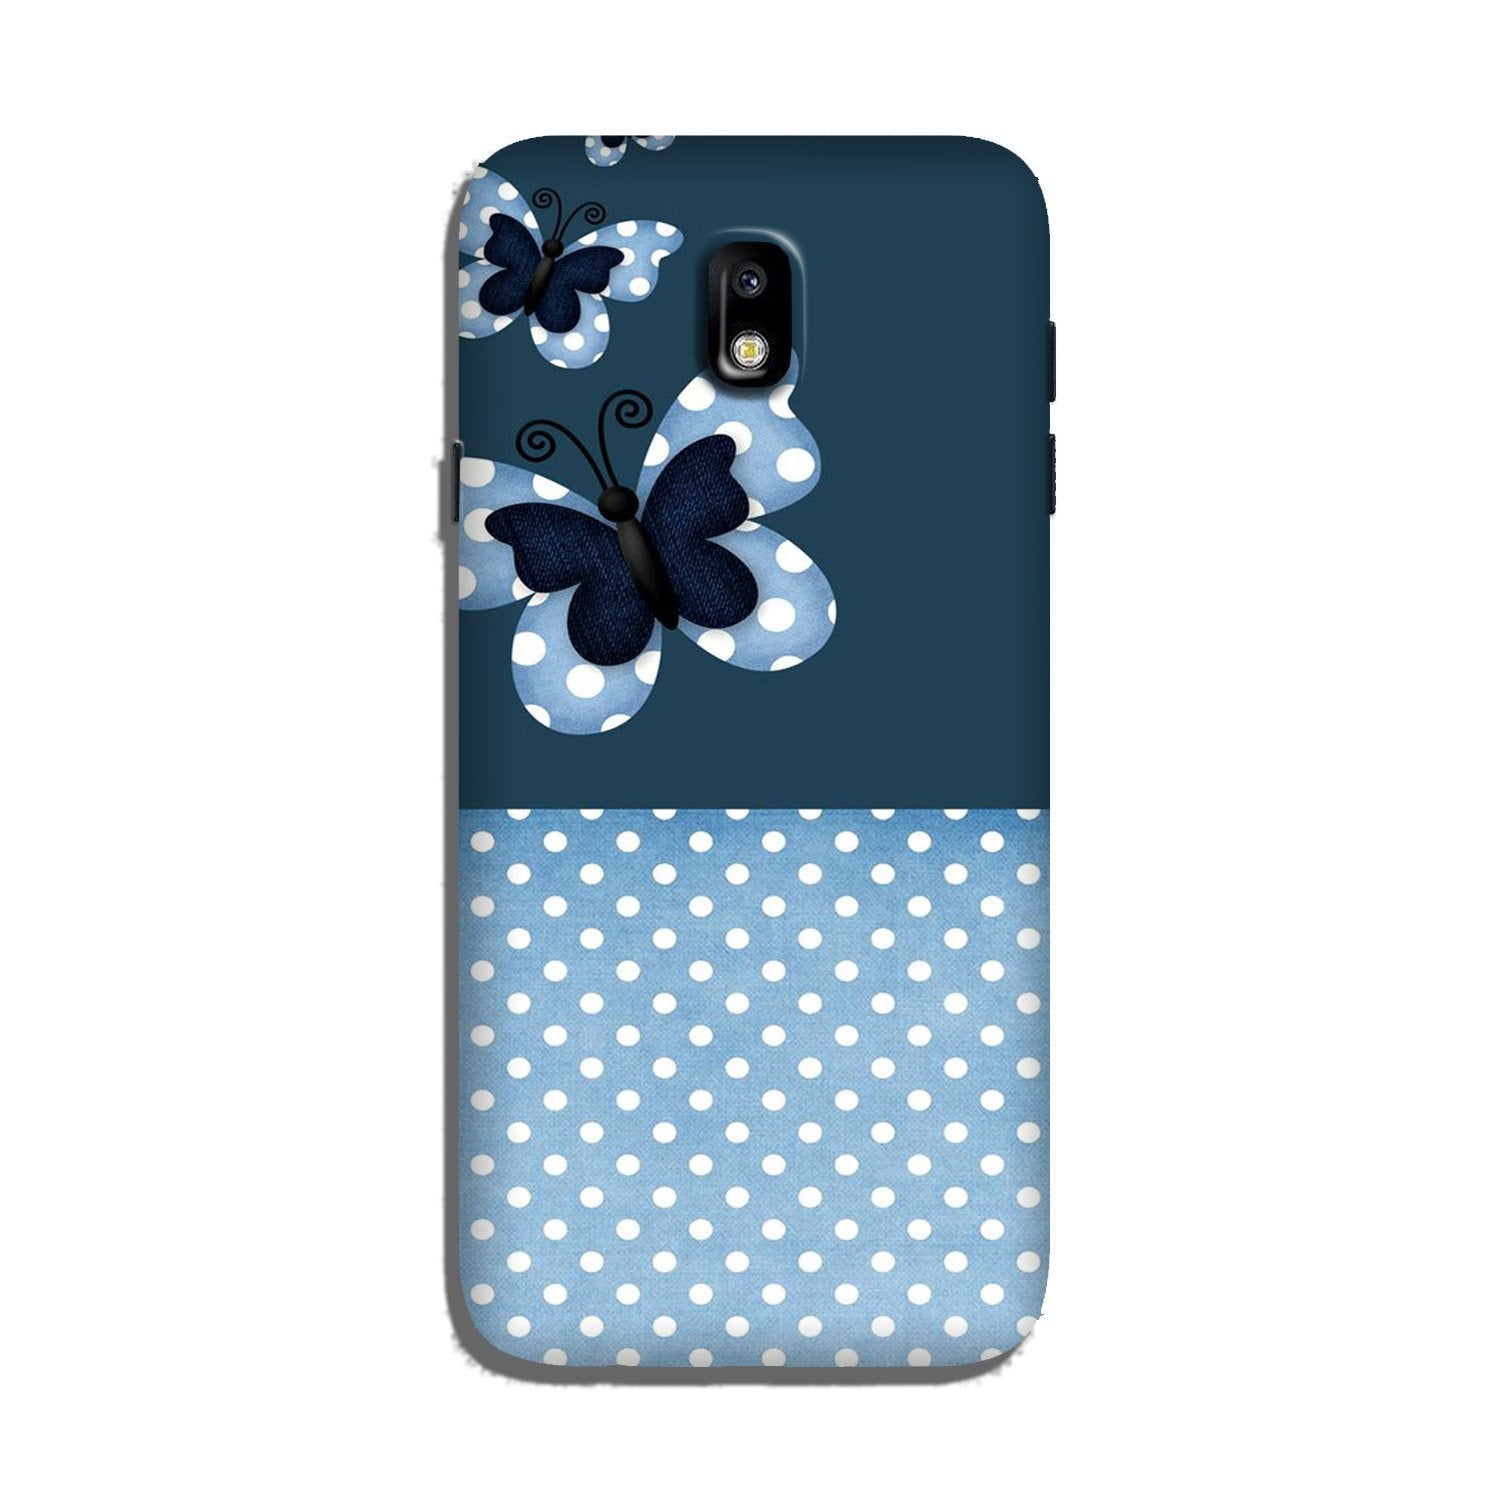 White dots Butterfly Case for Galaxy J7 Pro